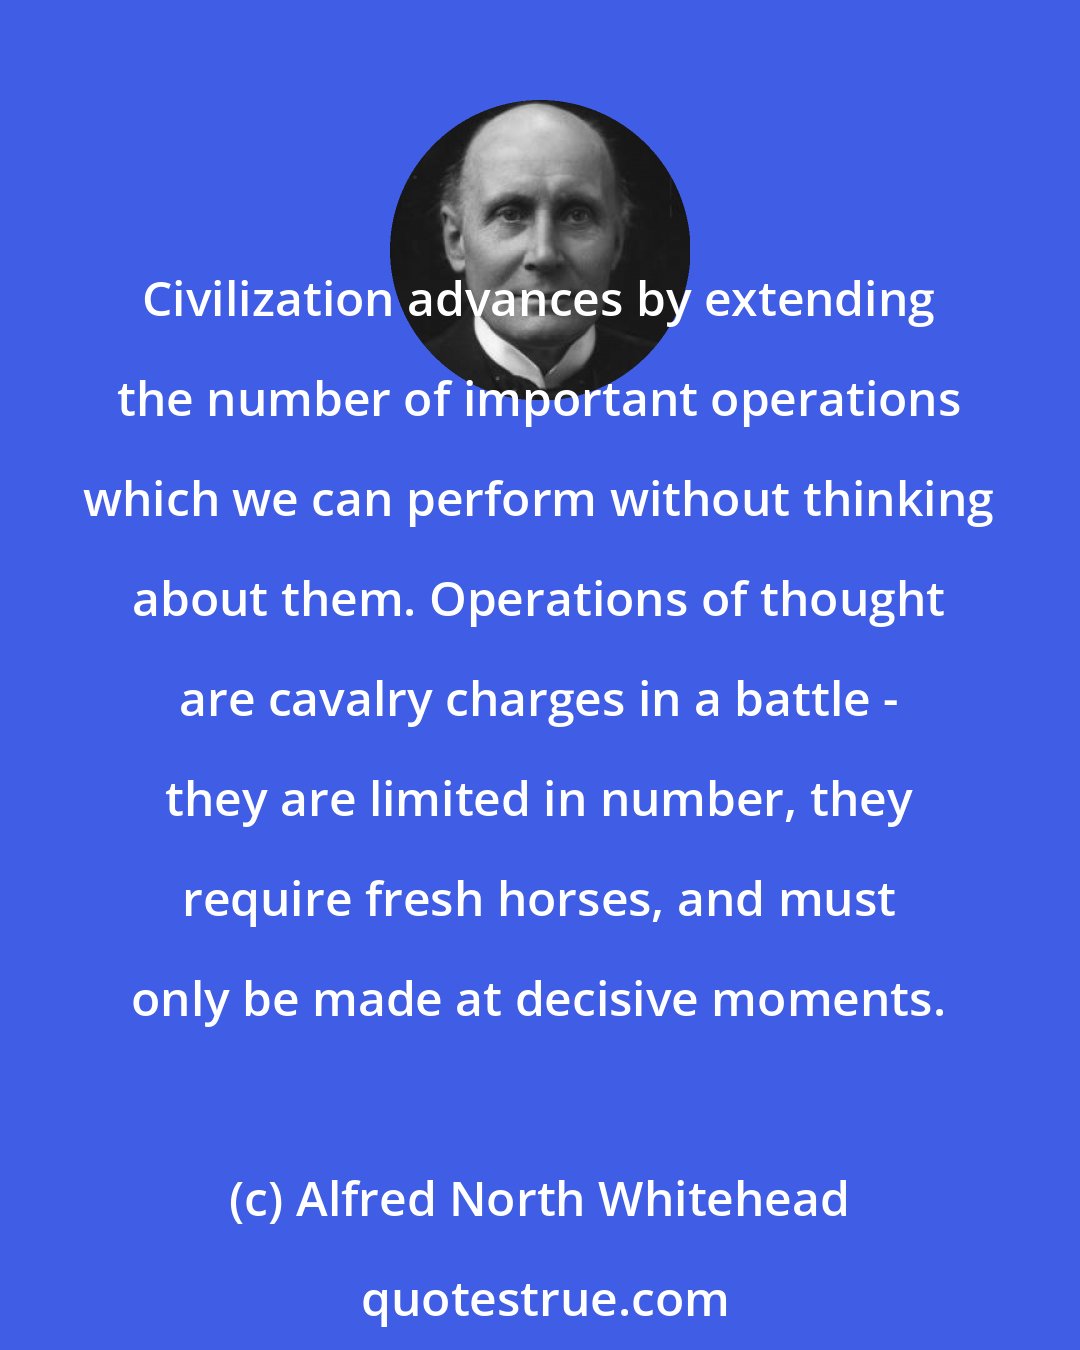 Alfred North Whitehead: Civilization advances by extending the number of important operations which we can perform without thinking about them. Operations of thought are cavalry charges in a battle - they are limited in number, they require fresh horses, and must only be made at decisive moments.